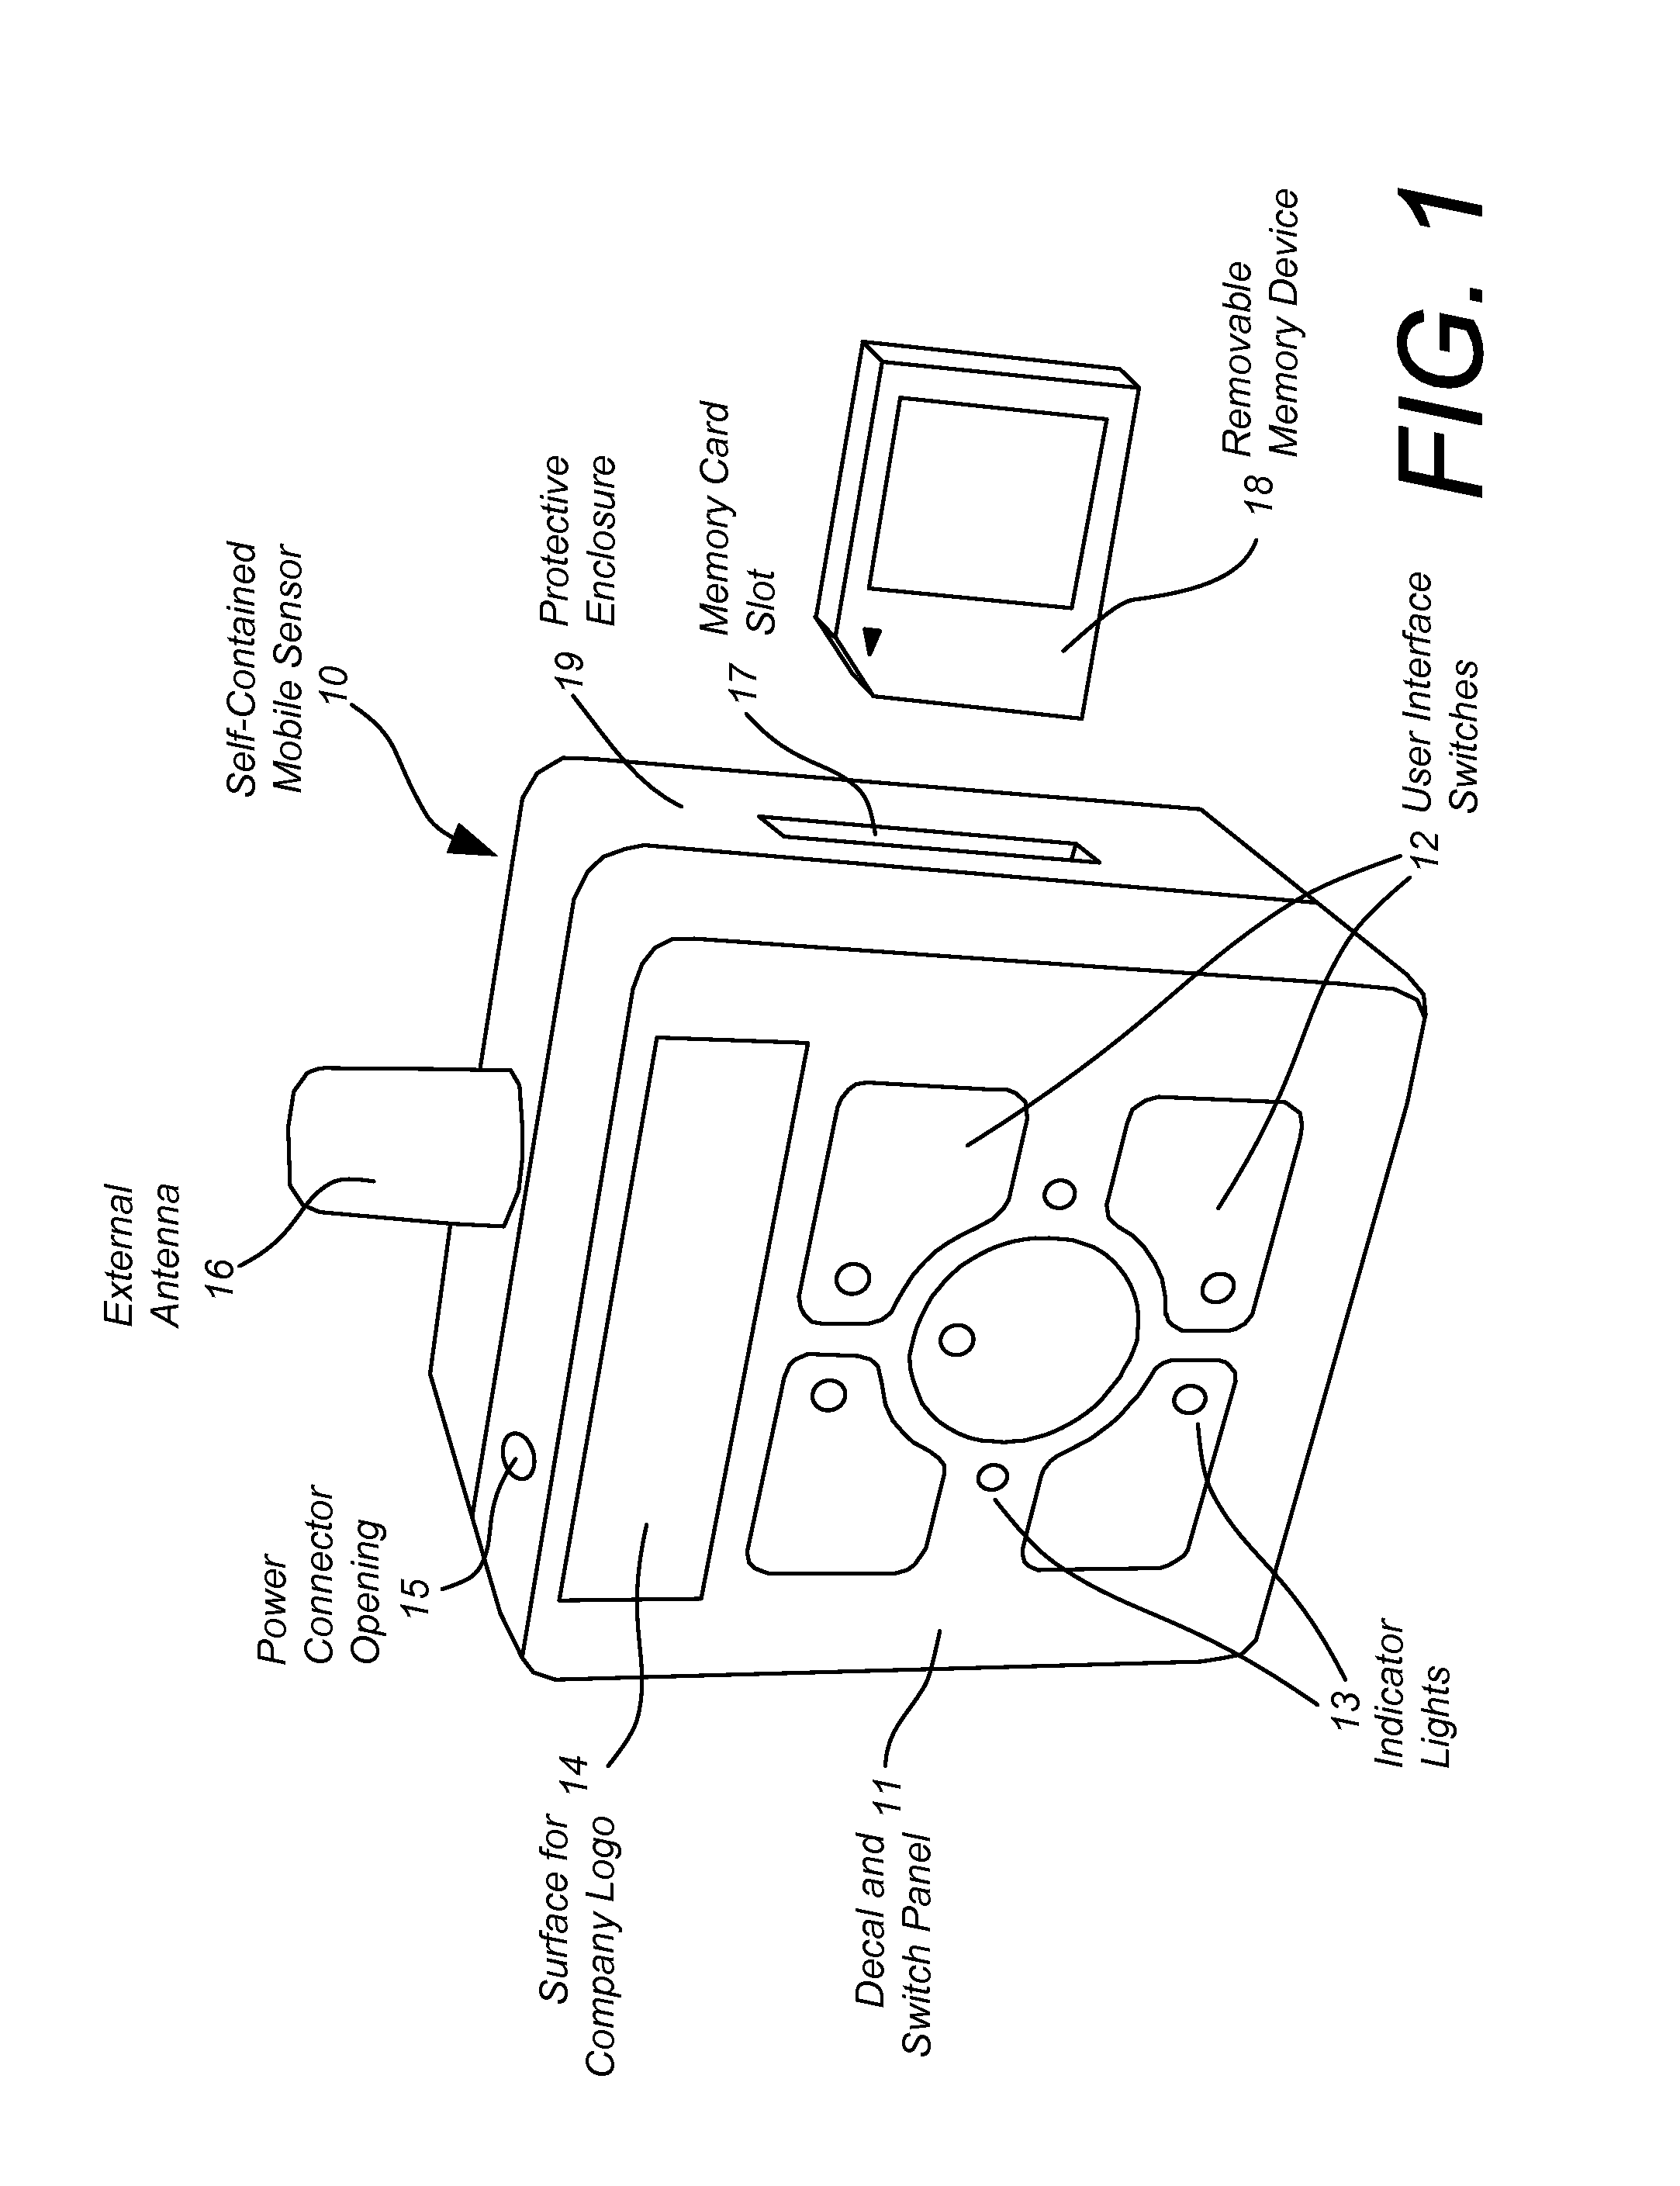 Synchronized video and synthetic visualization system and method